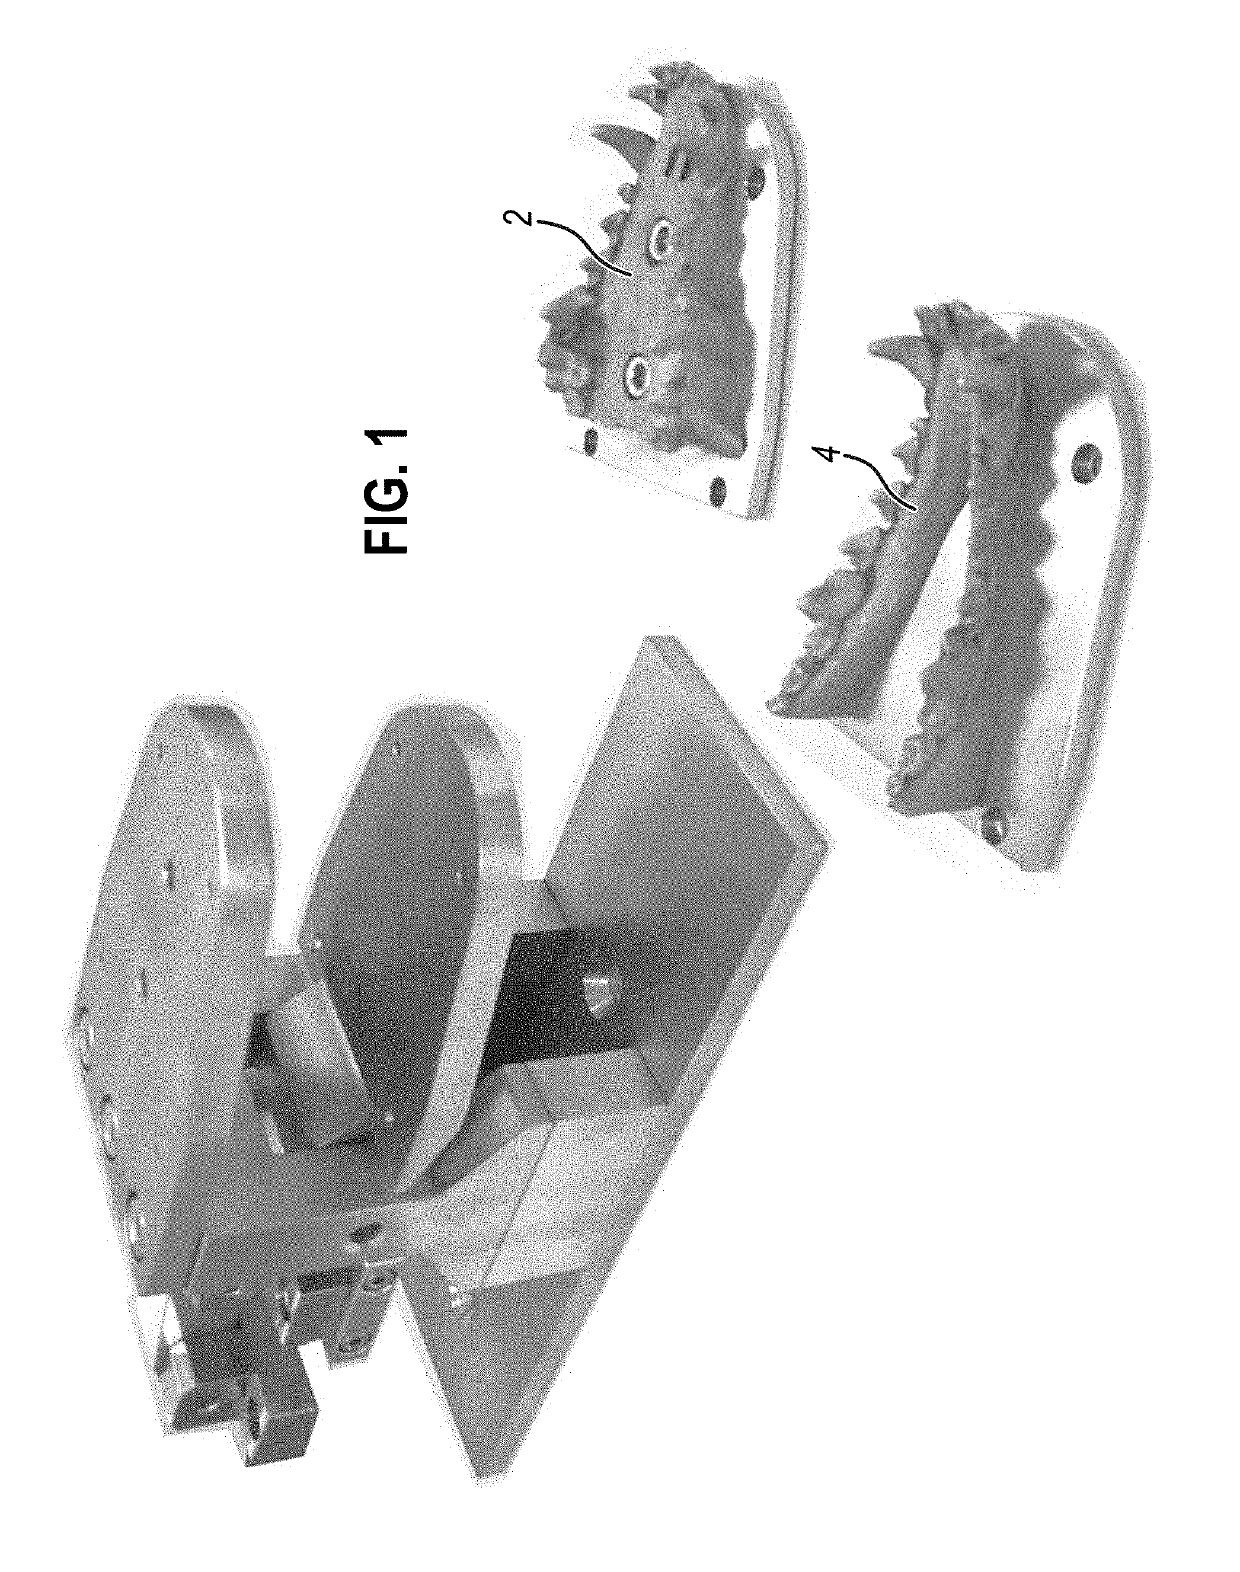 Animal dentistry apparatus and methods